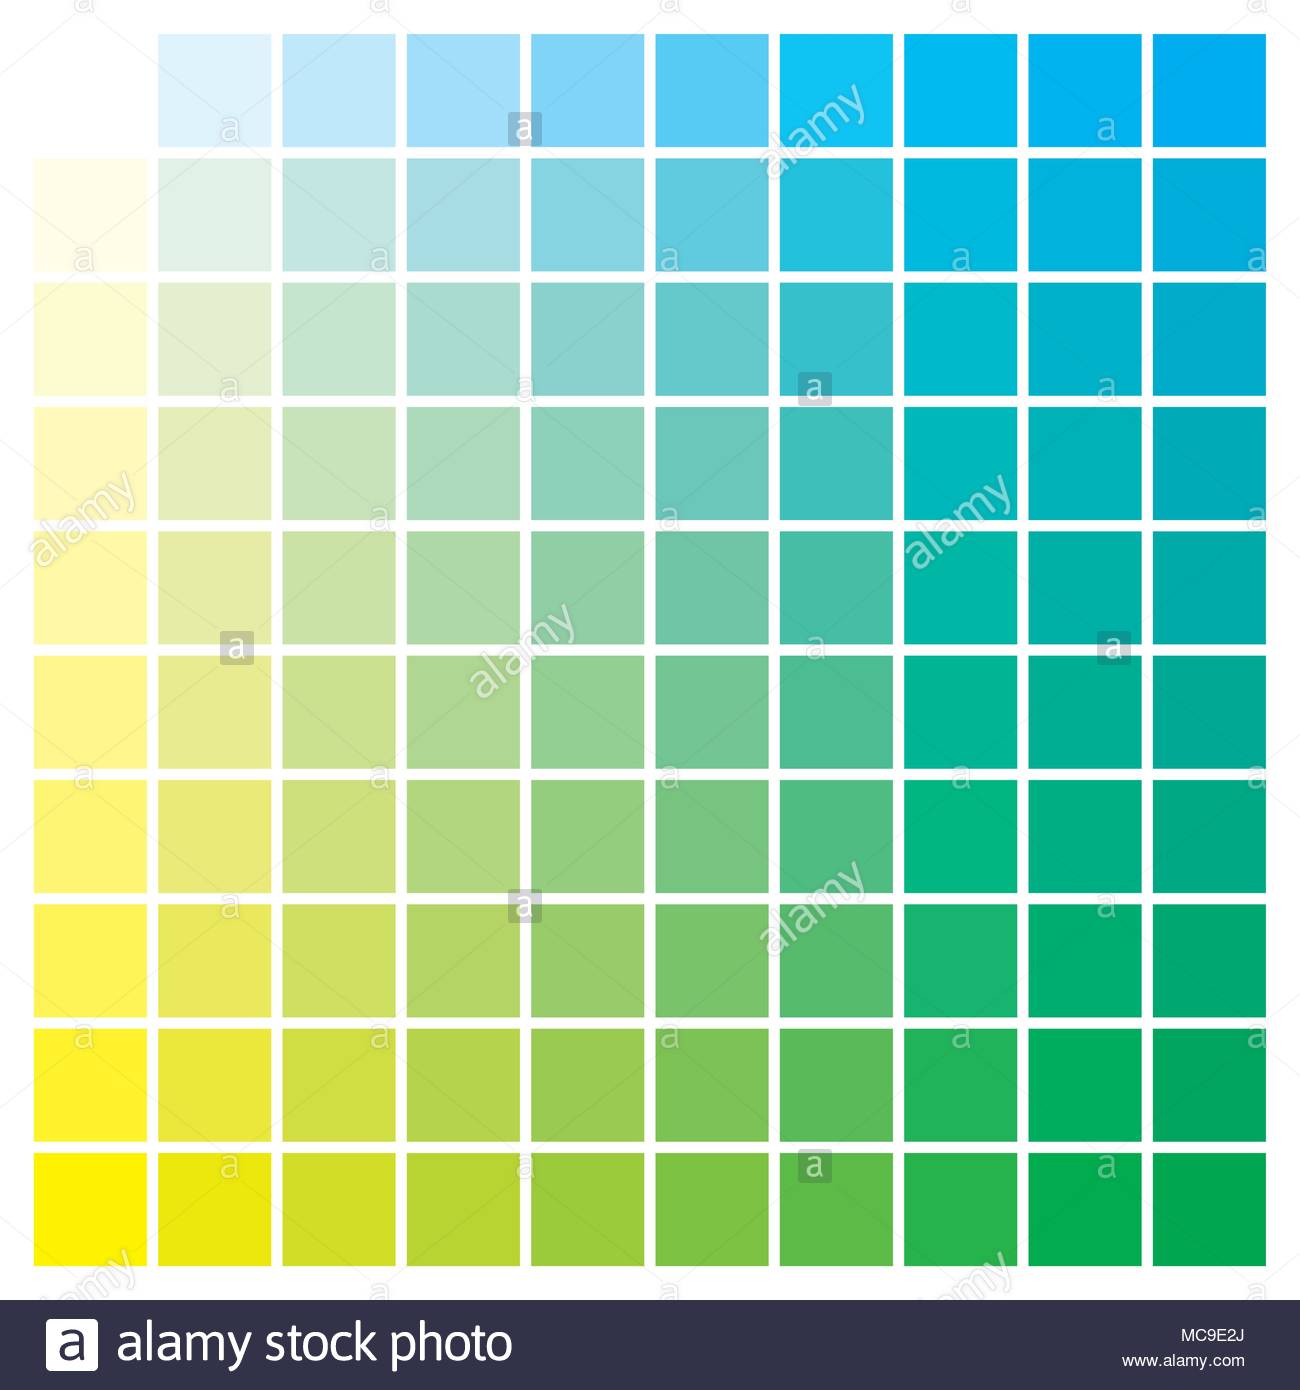 Color Chart For Teal